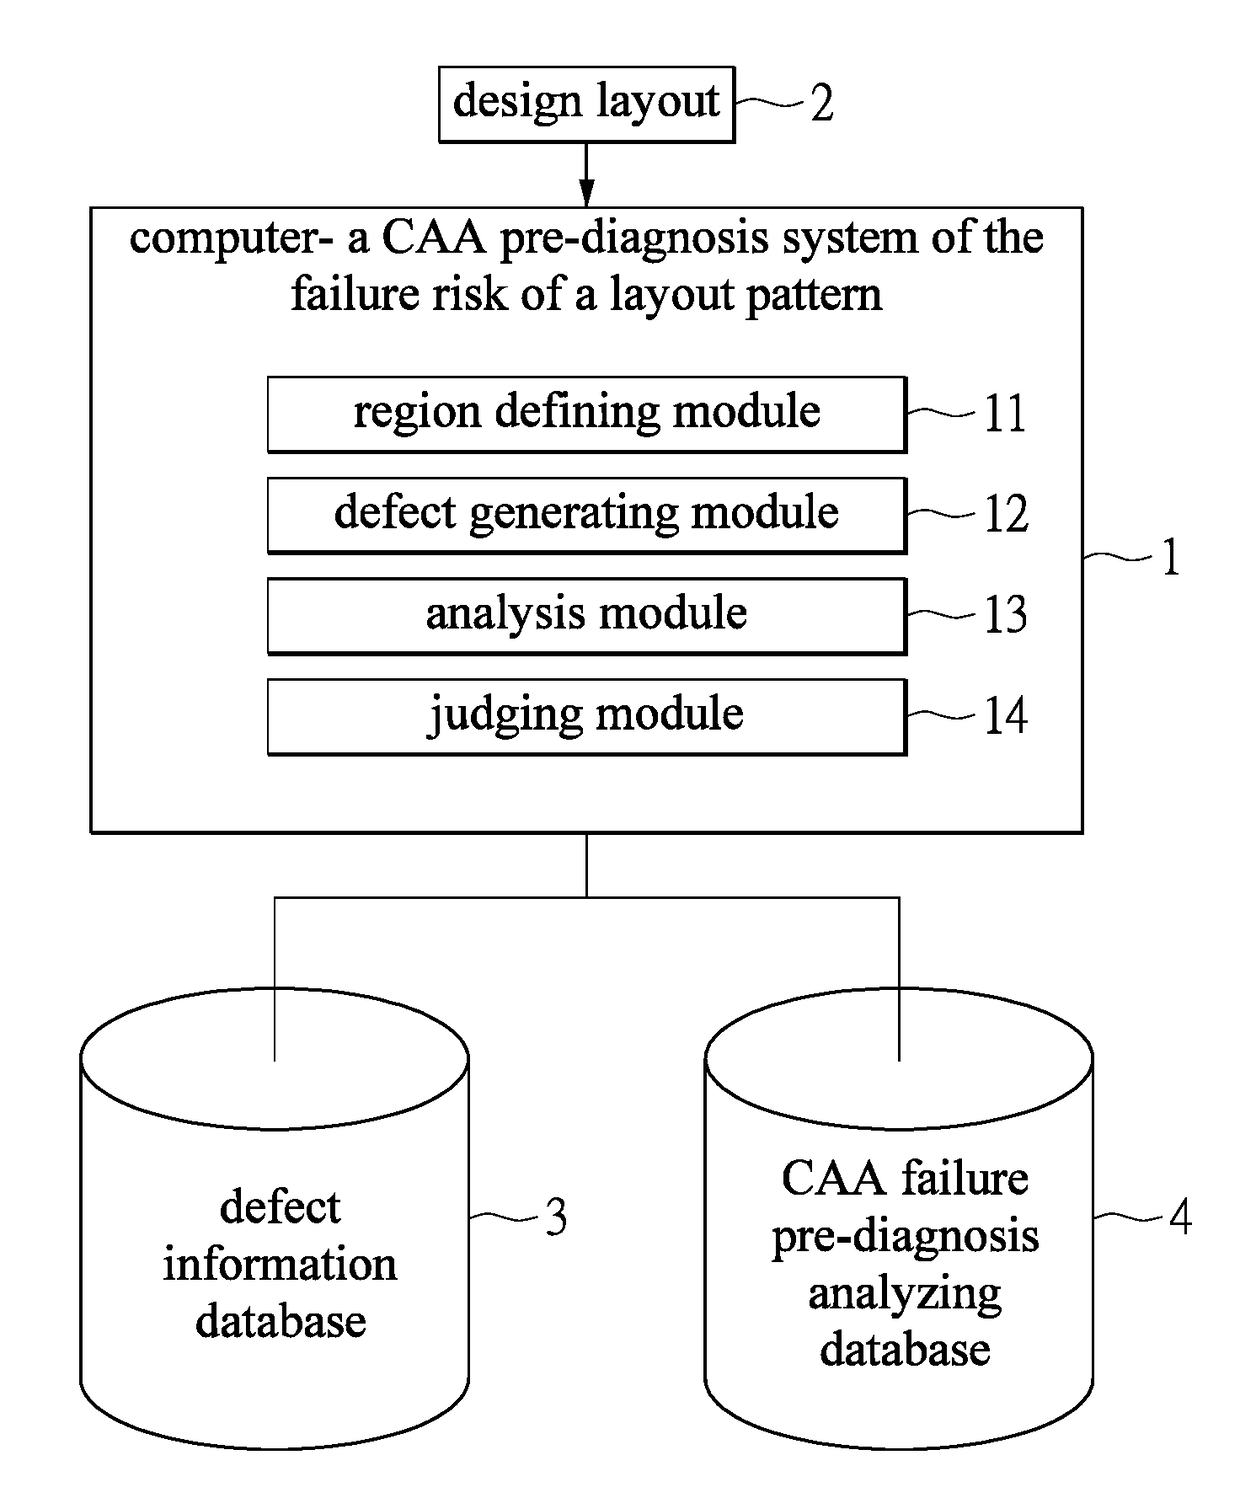 Intelligent caa failure pre-diagnosis method and system for design layout